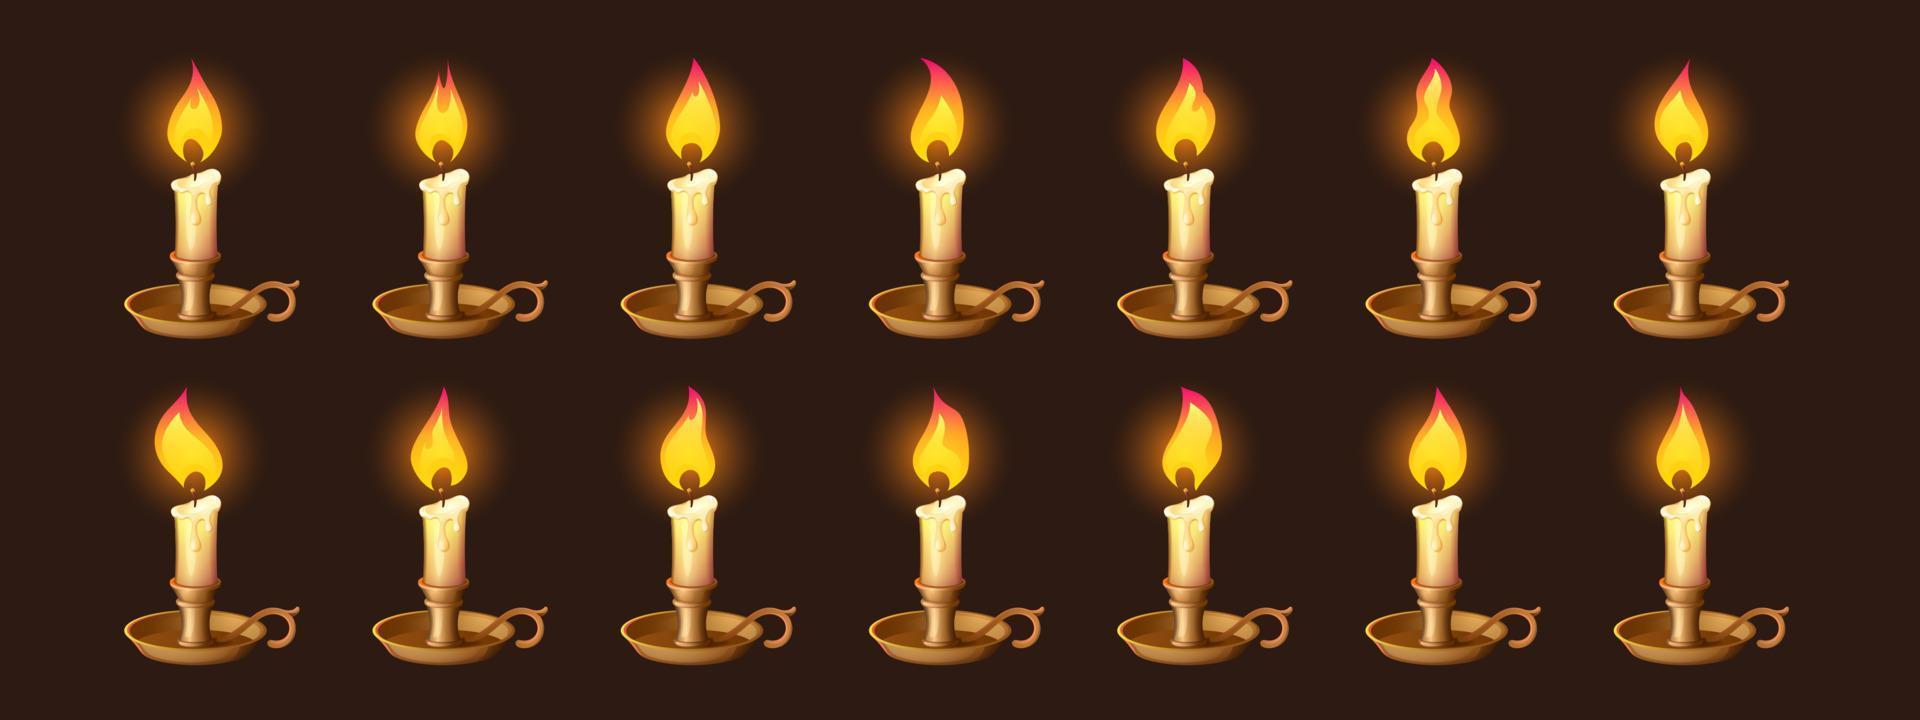 Cartoon burning candles in candlestick animation vector